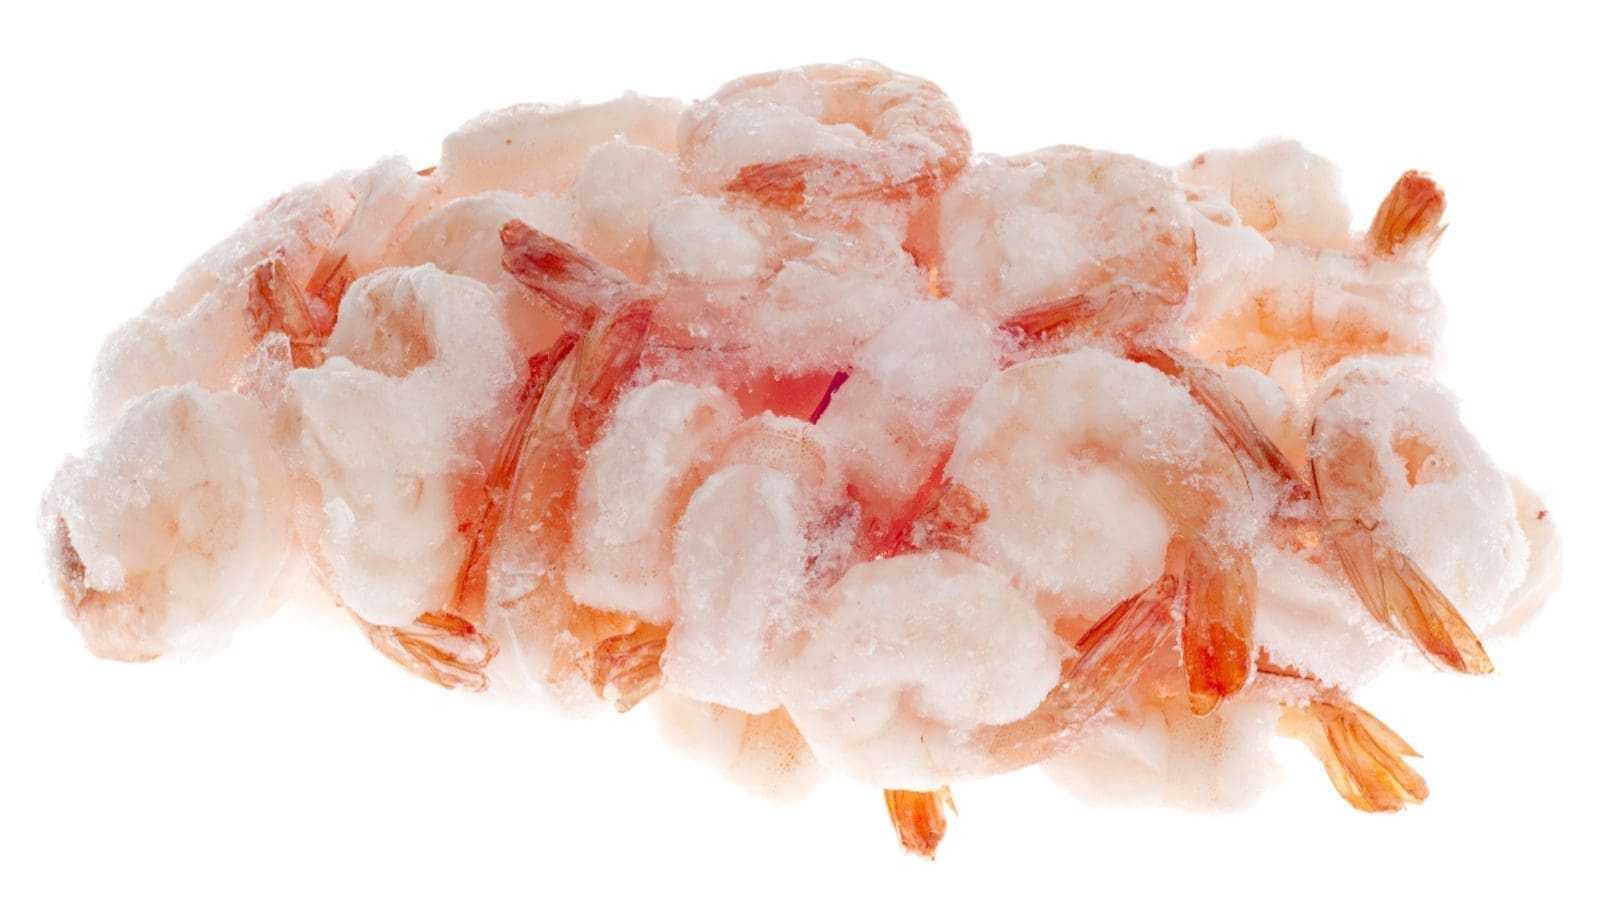 Yet another frozen shrimp recall from Avanti Frozen Foods as salmonella infection spreads